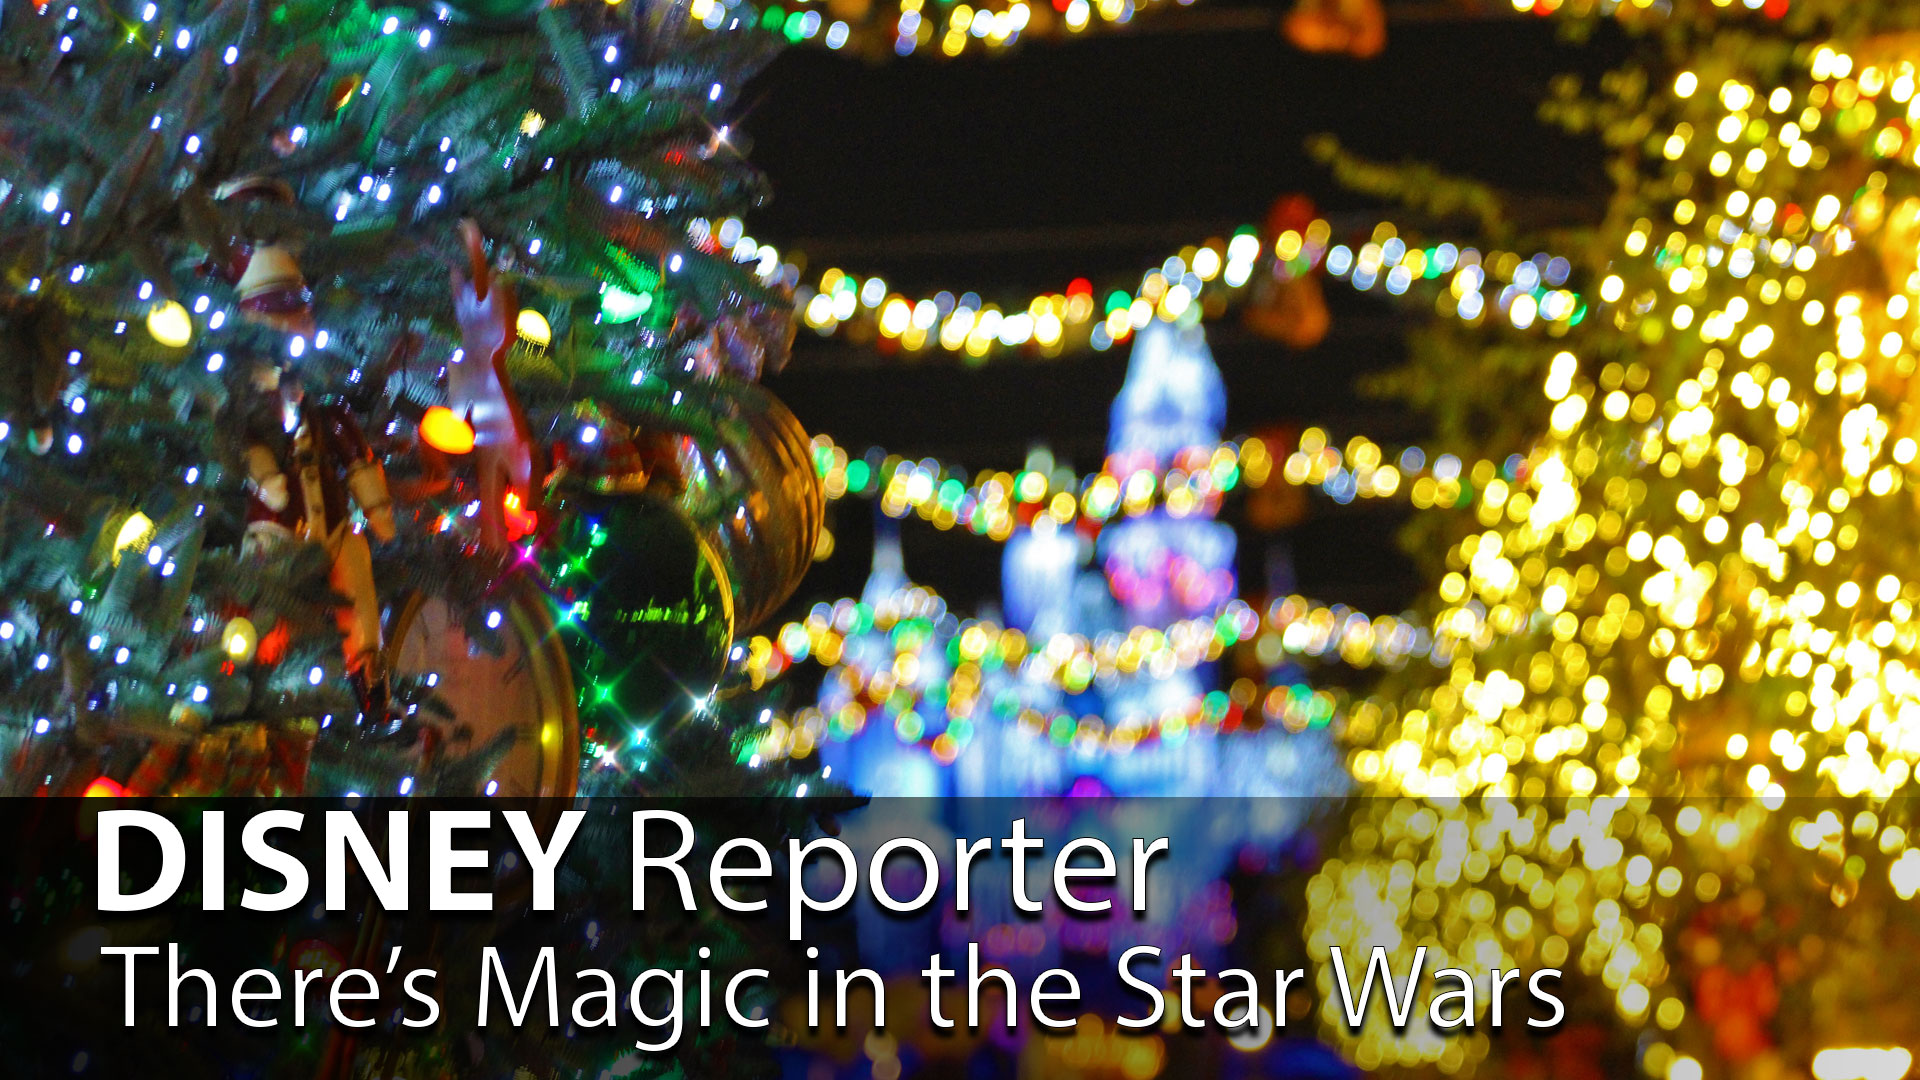 There's Magic in the Star Wars - DISNEY Reporter